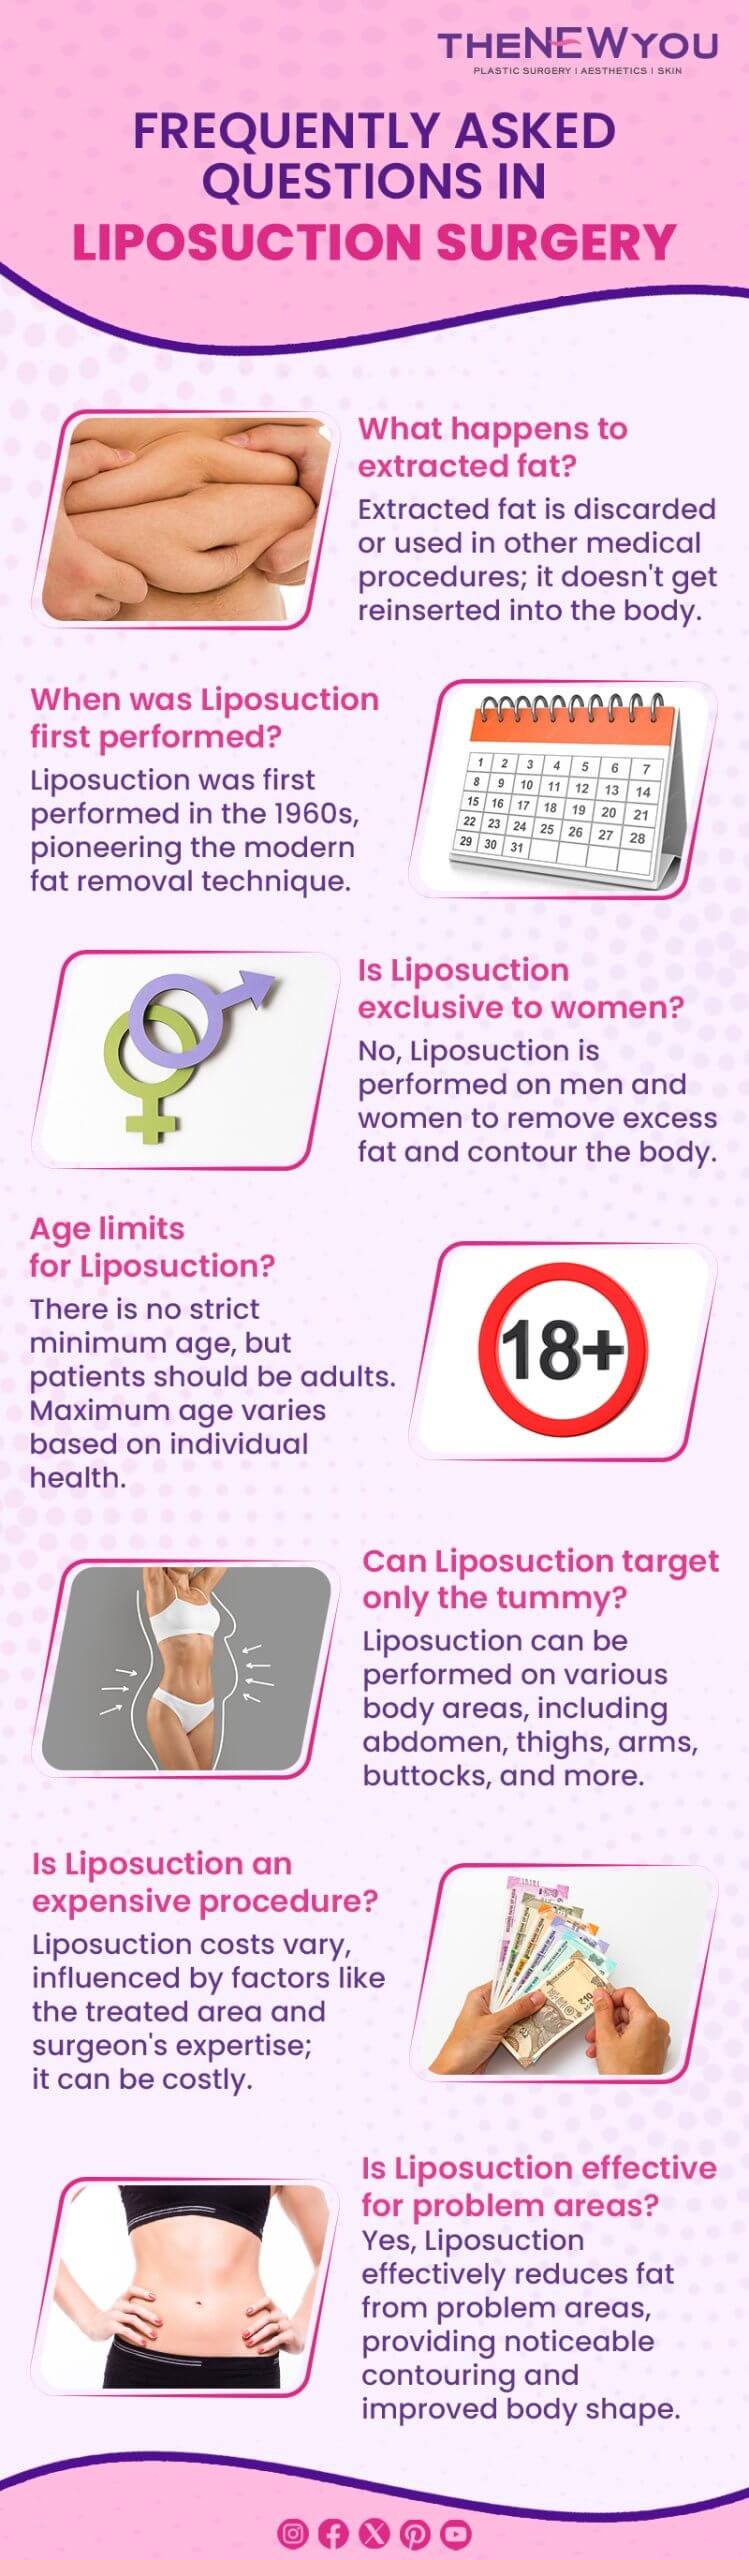 FAQs in Liposuction Surgery